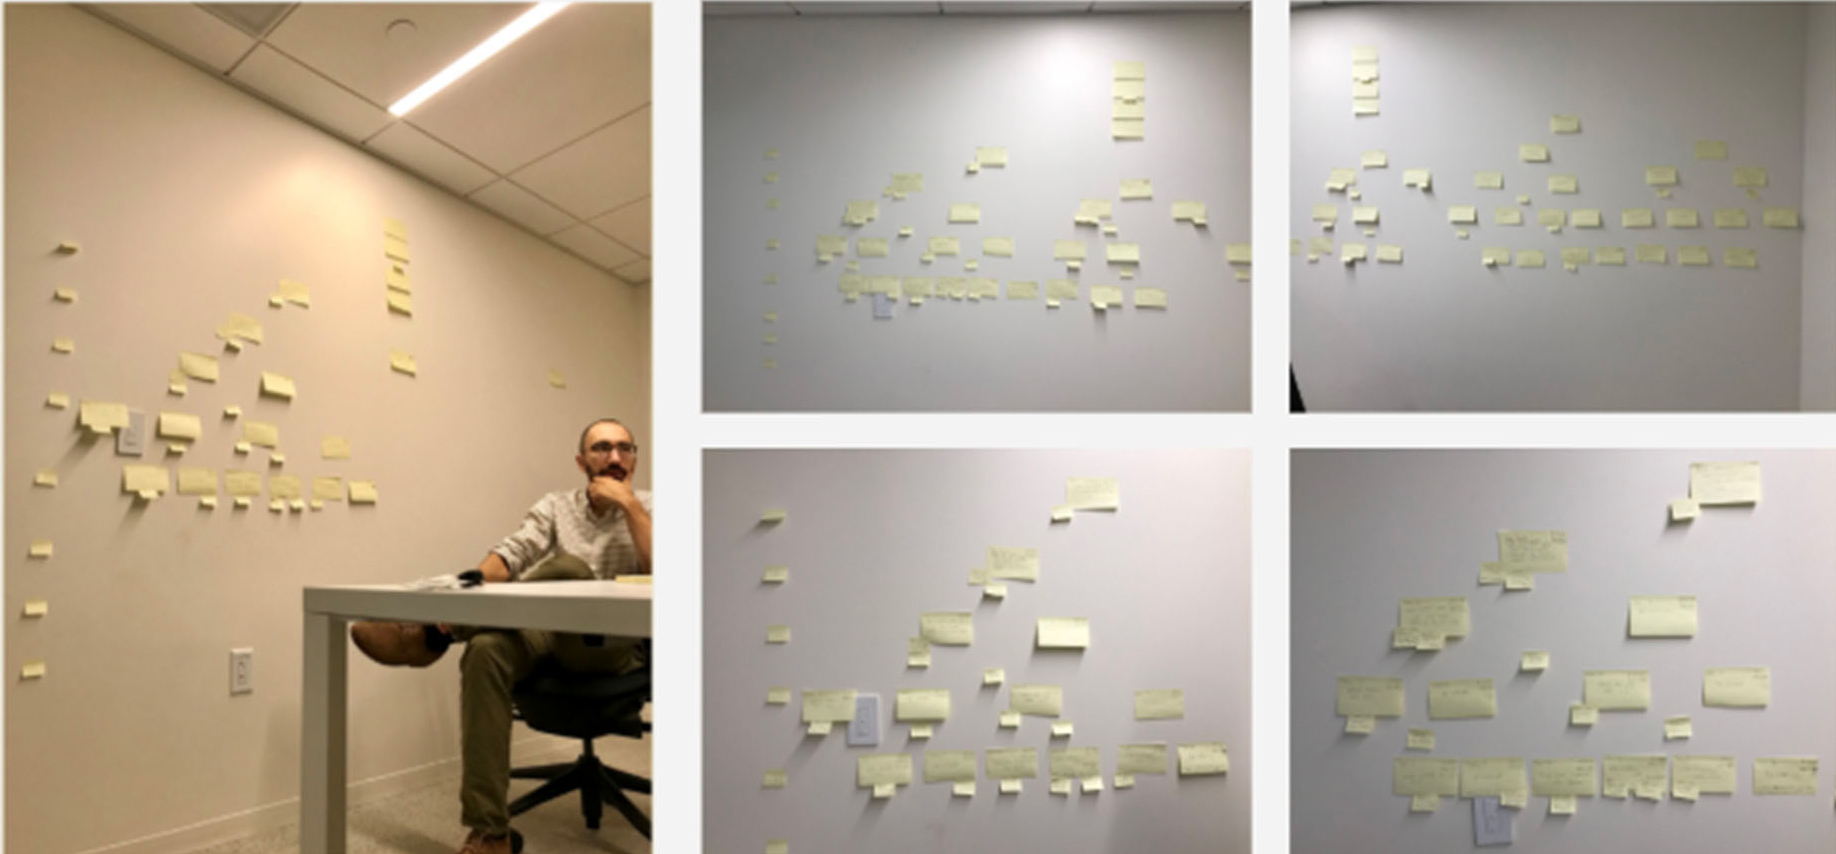 Post it notes stuck onto a wall which we used to brainstorm